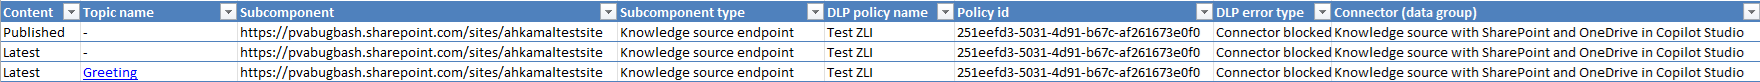 Screenshot of a downloaded excel file showing details of DLP policy violations including HTTP connector.